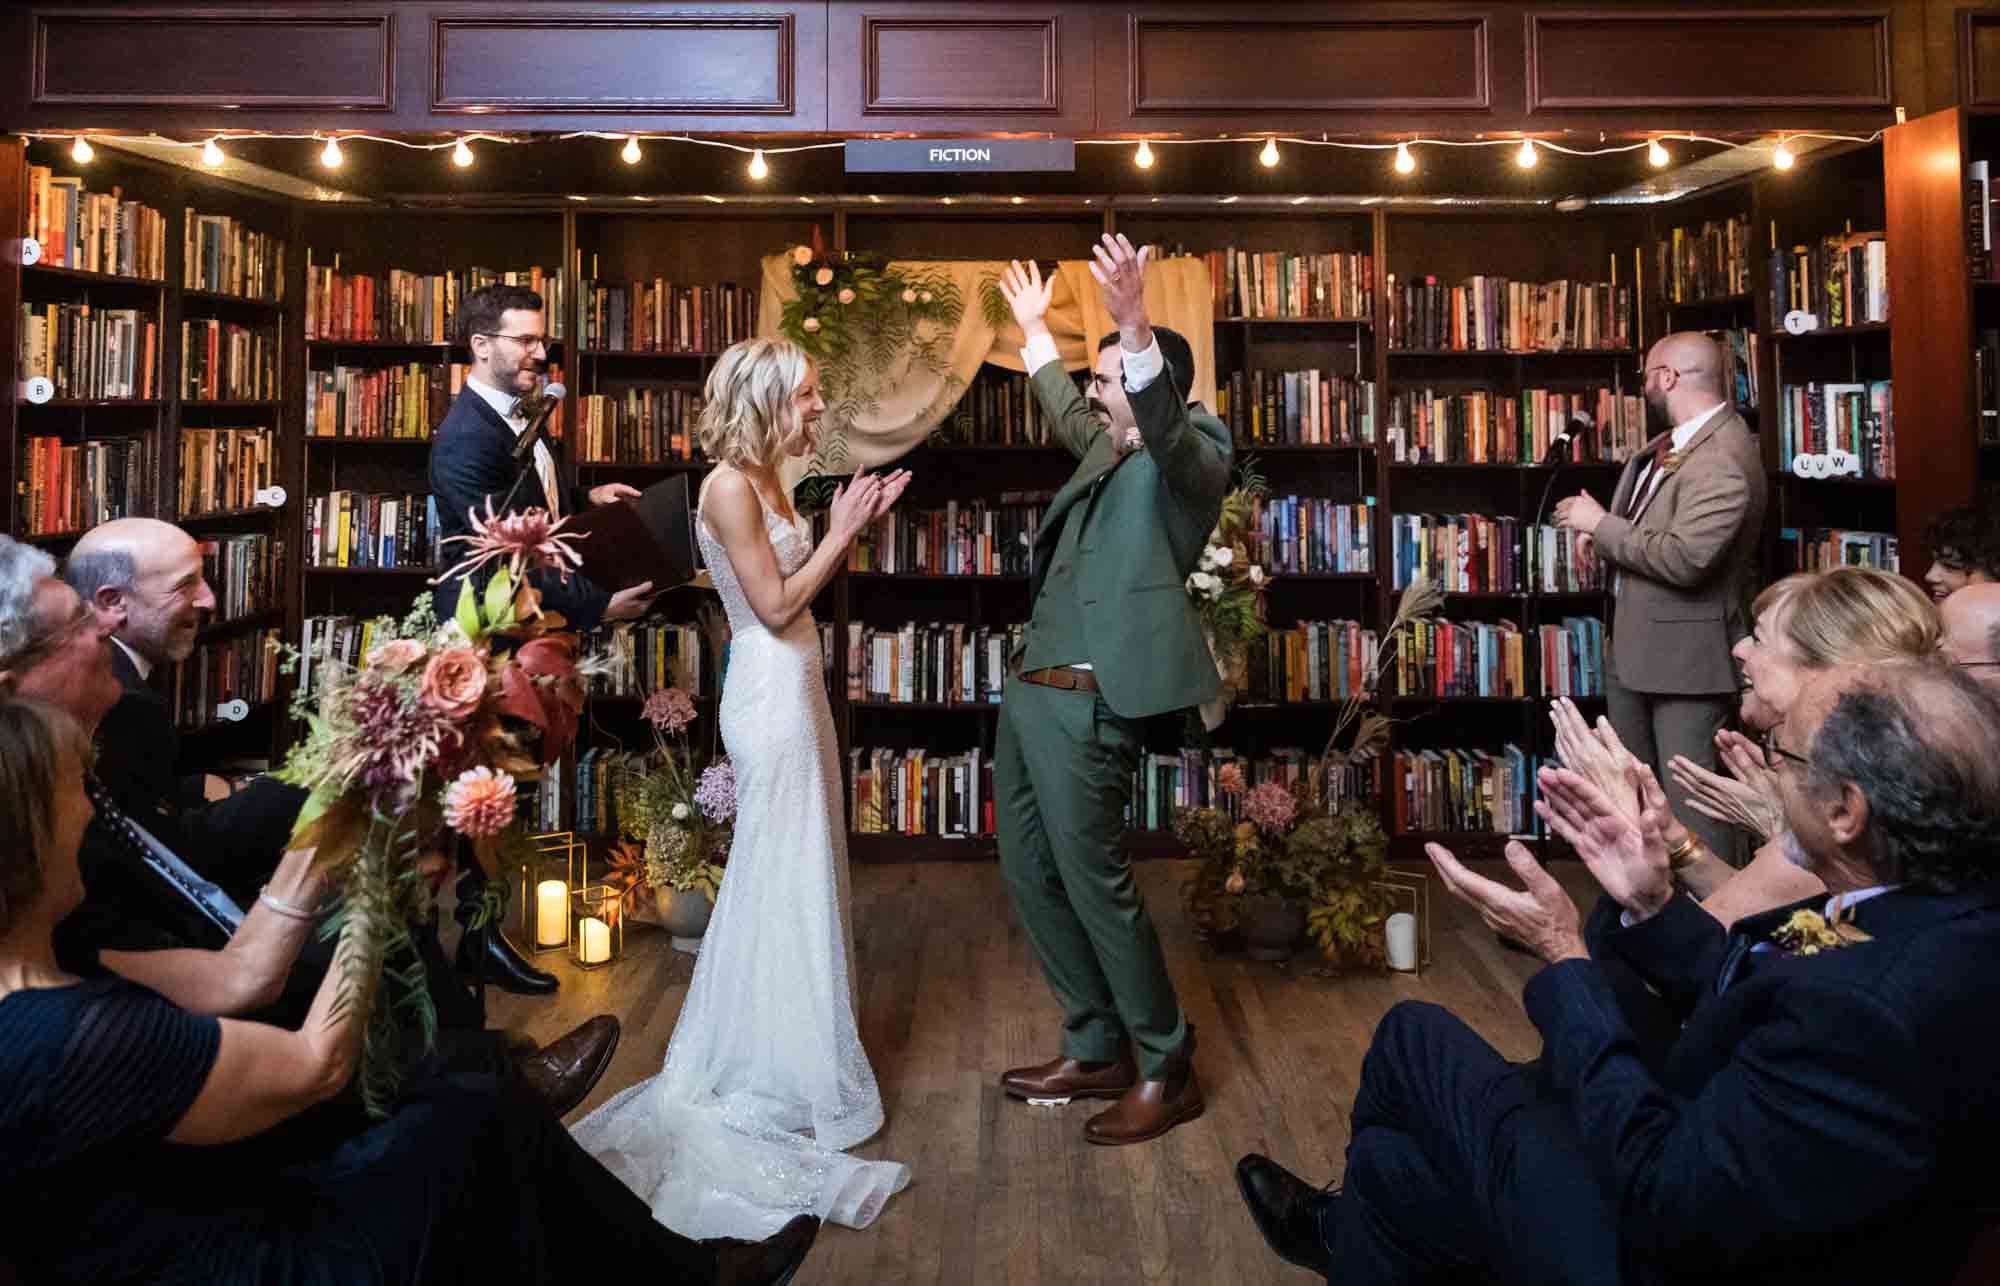 Bride and groom celebrating in front of bookshelf for an article on should you give your wedding photographer a shot list